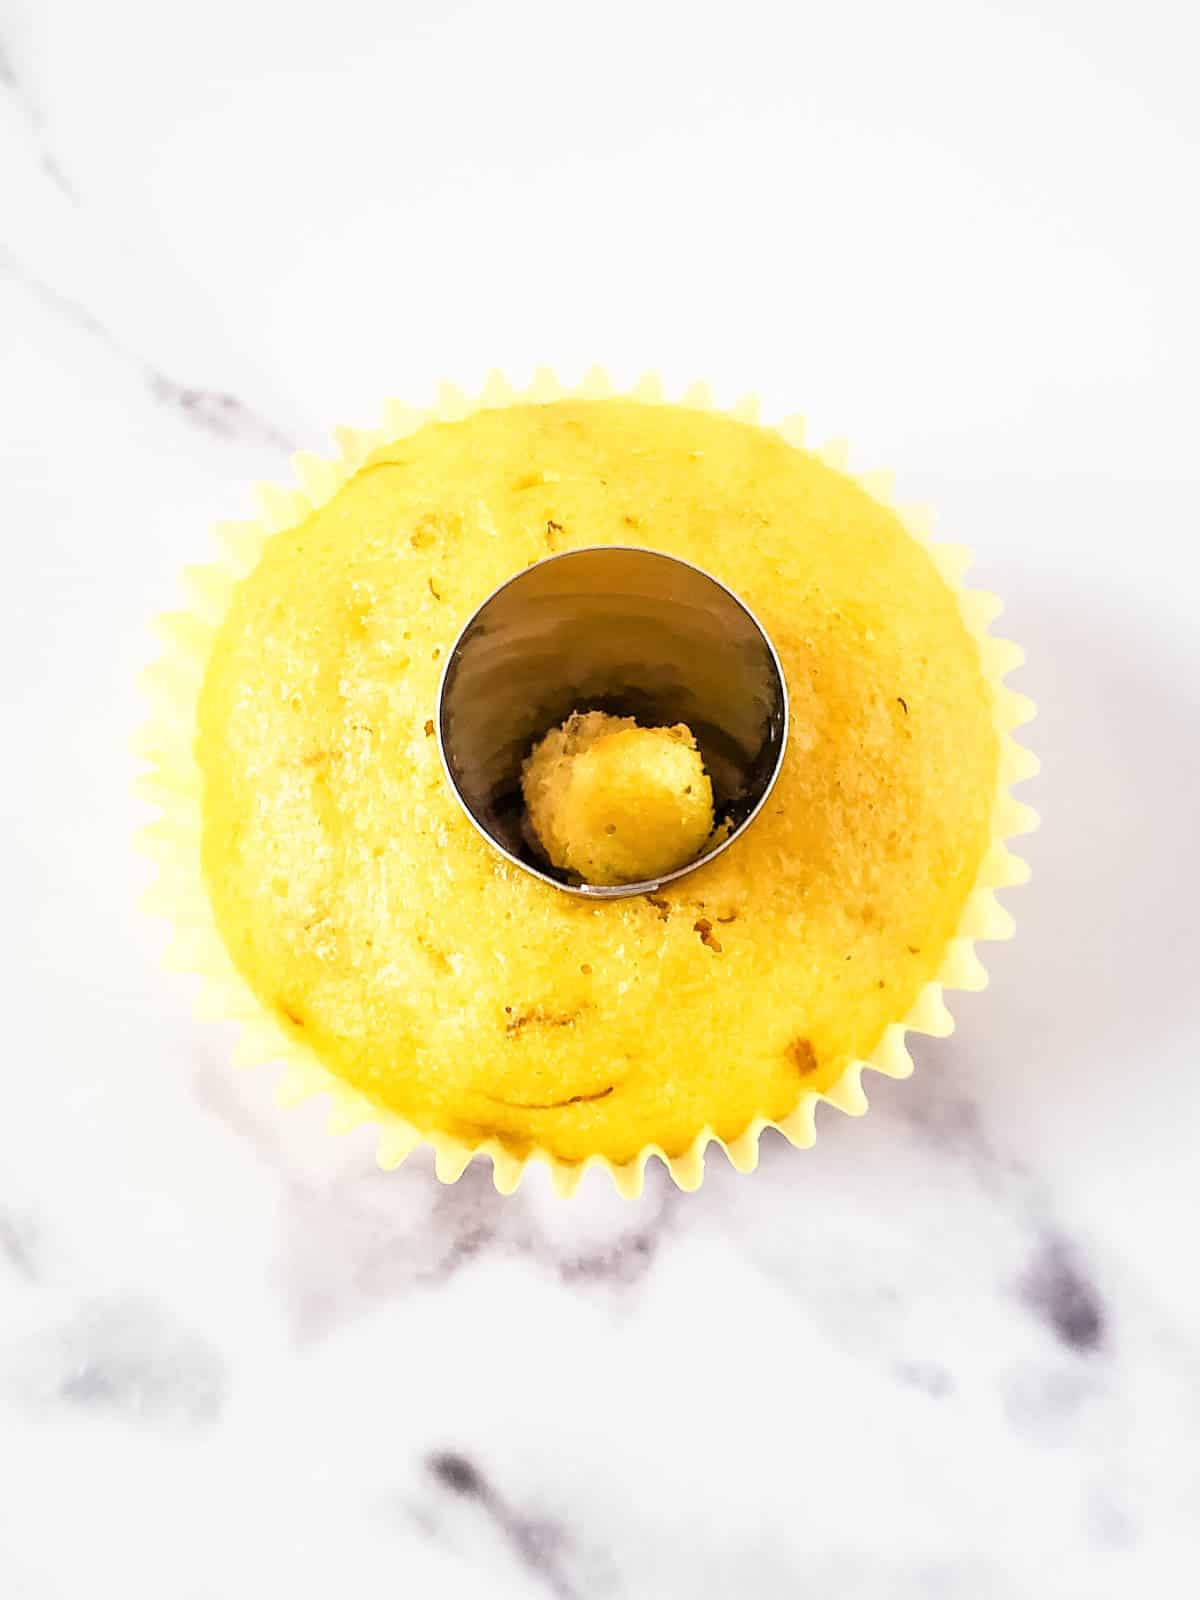 Creating a well in the cupcake with a frosting tip.